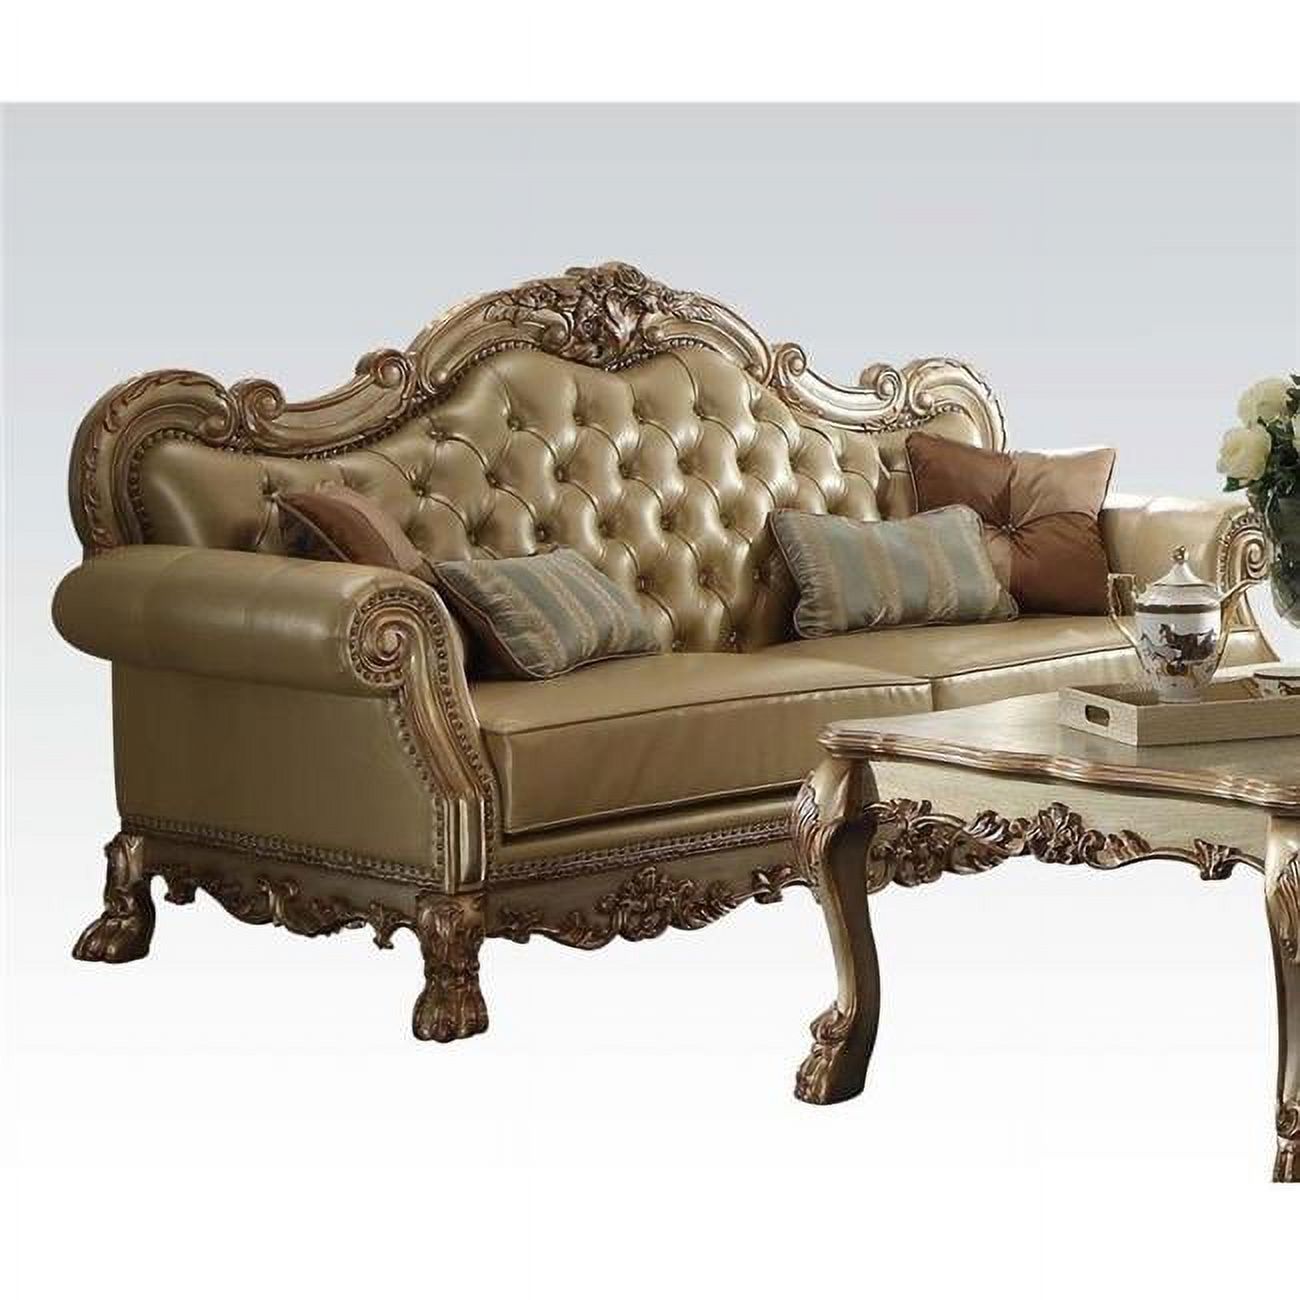 ACME 53160 Dresden Sofa with 4 Pillows&#44; Bone PU & Gold Patina - 43 x 87 x 41 in. - image 1 of 2